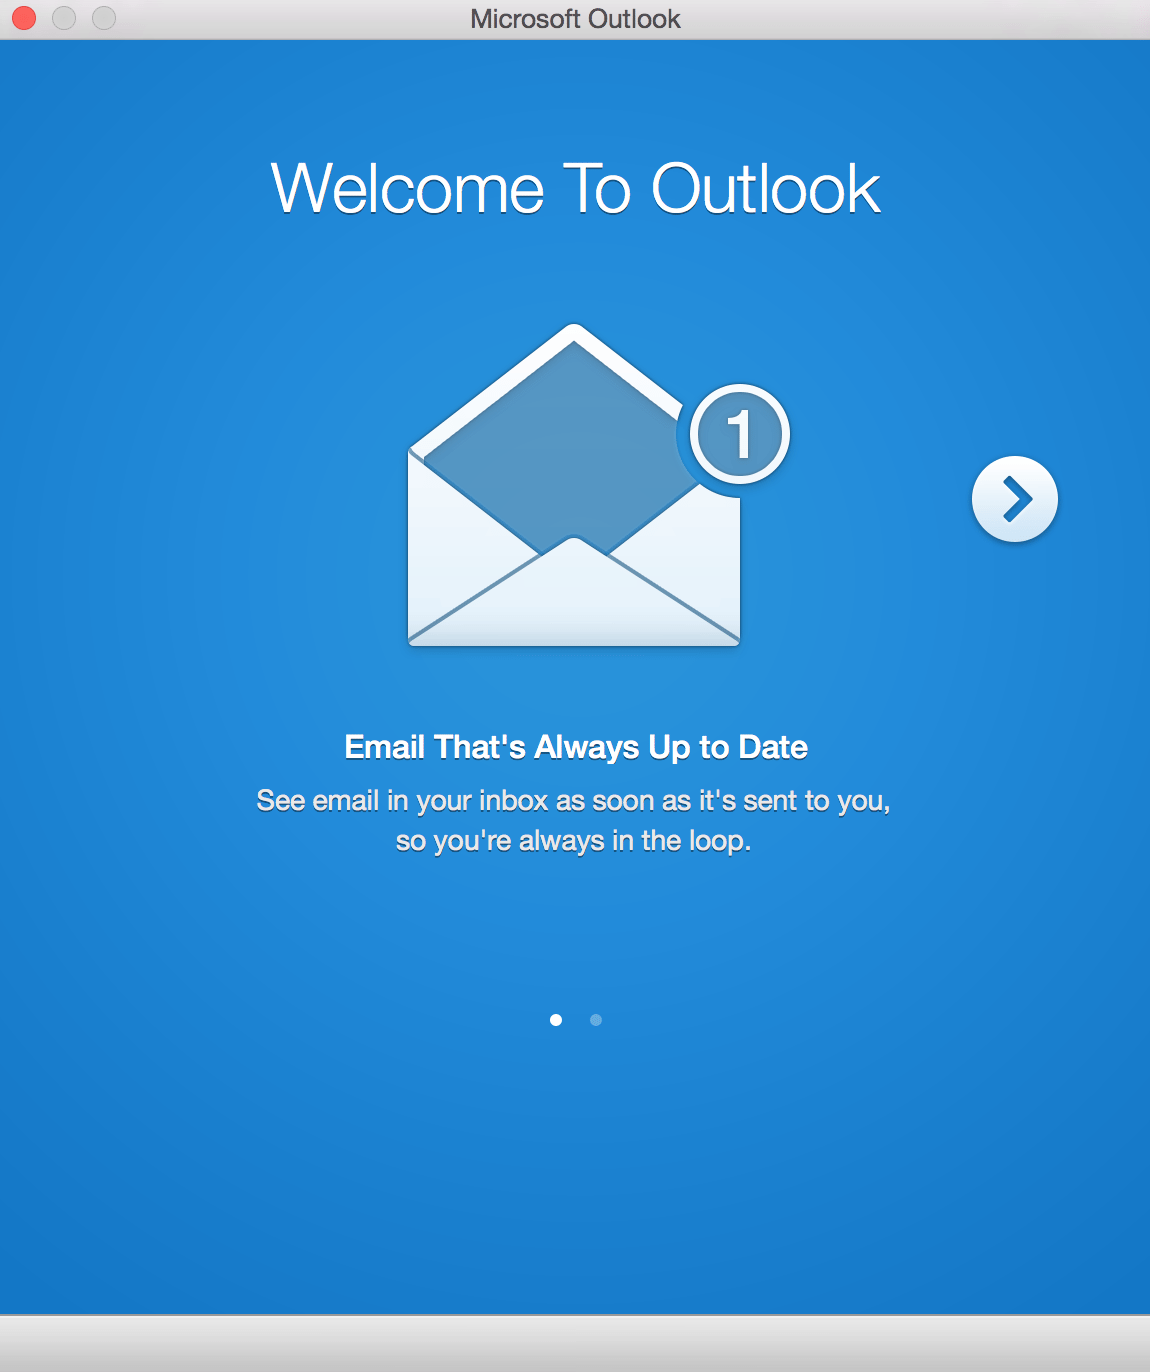 microsoft outlook crashes when opening image 2016